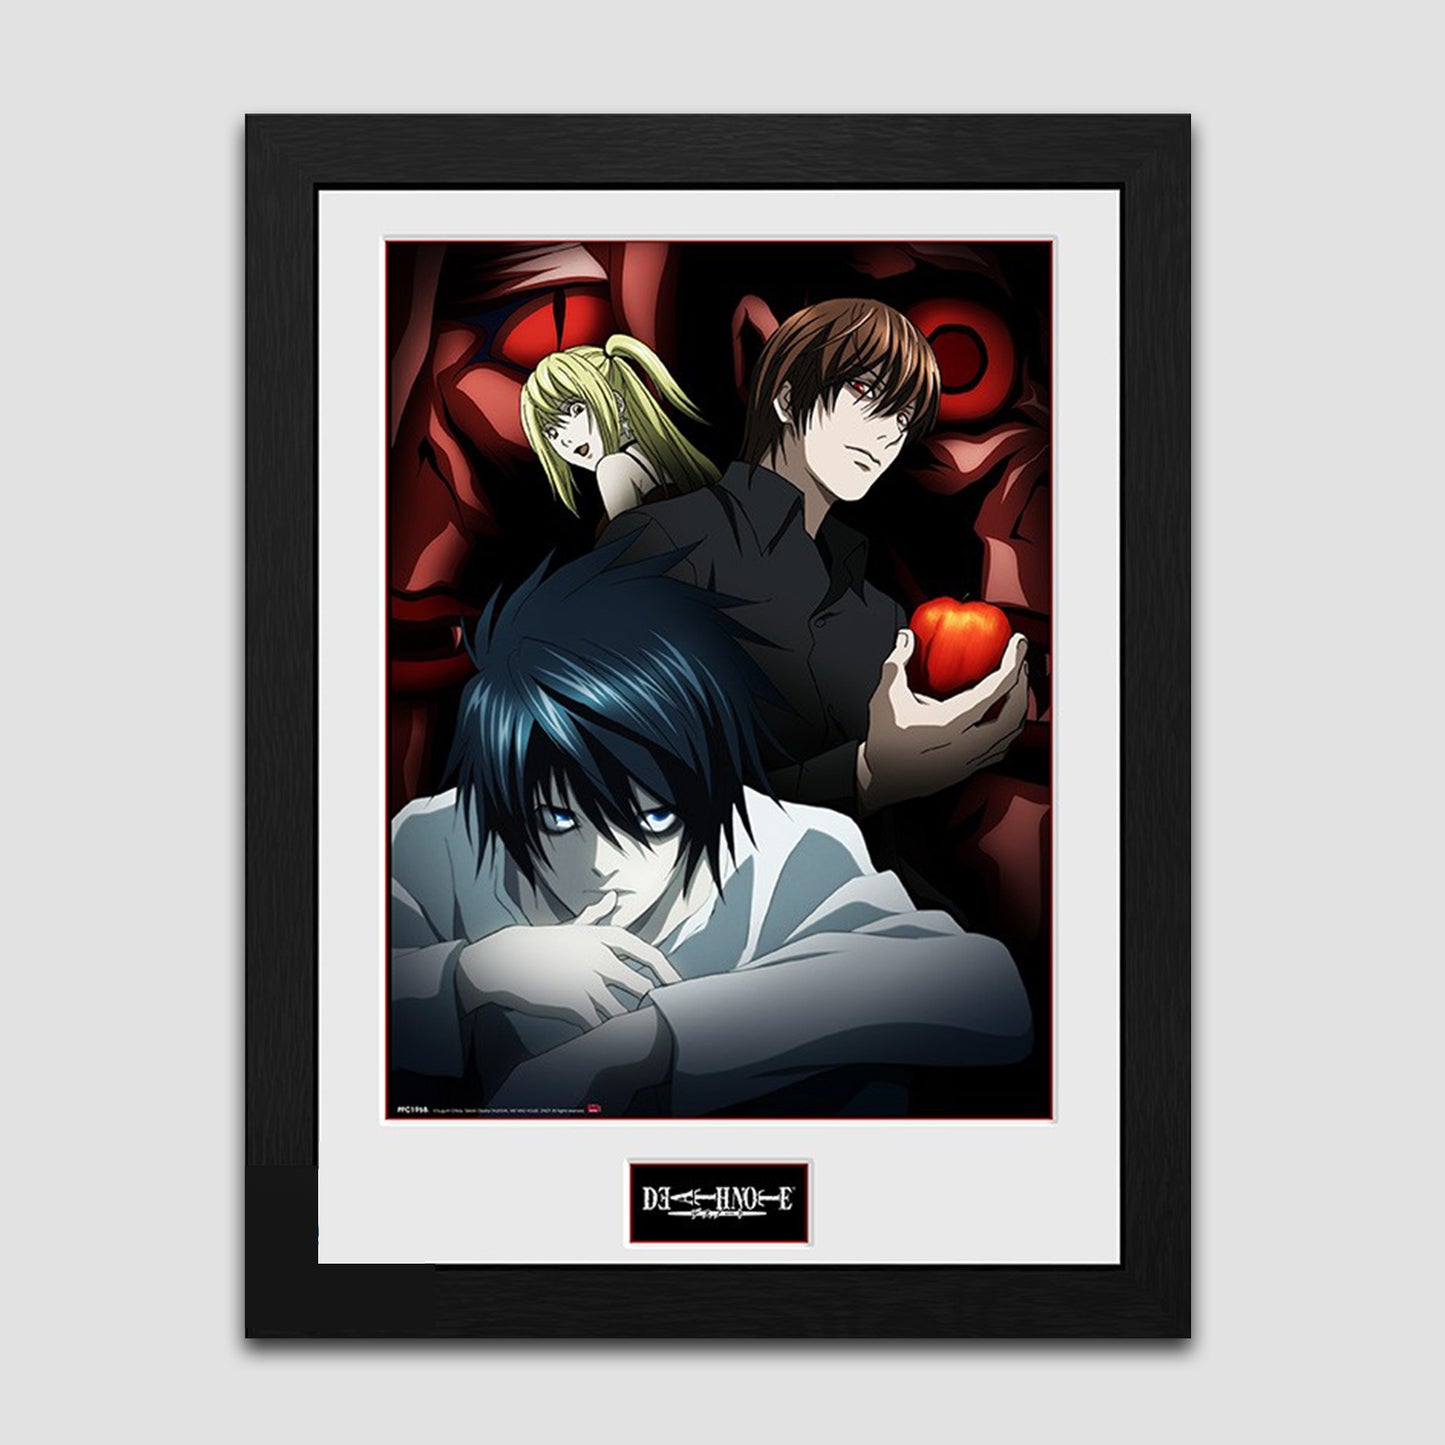 Load image into Gallery viewer, Light, L, and Misa (Death Note) Framed Art Print
